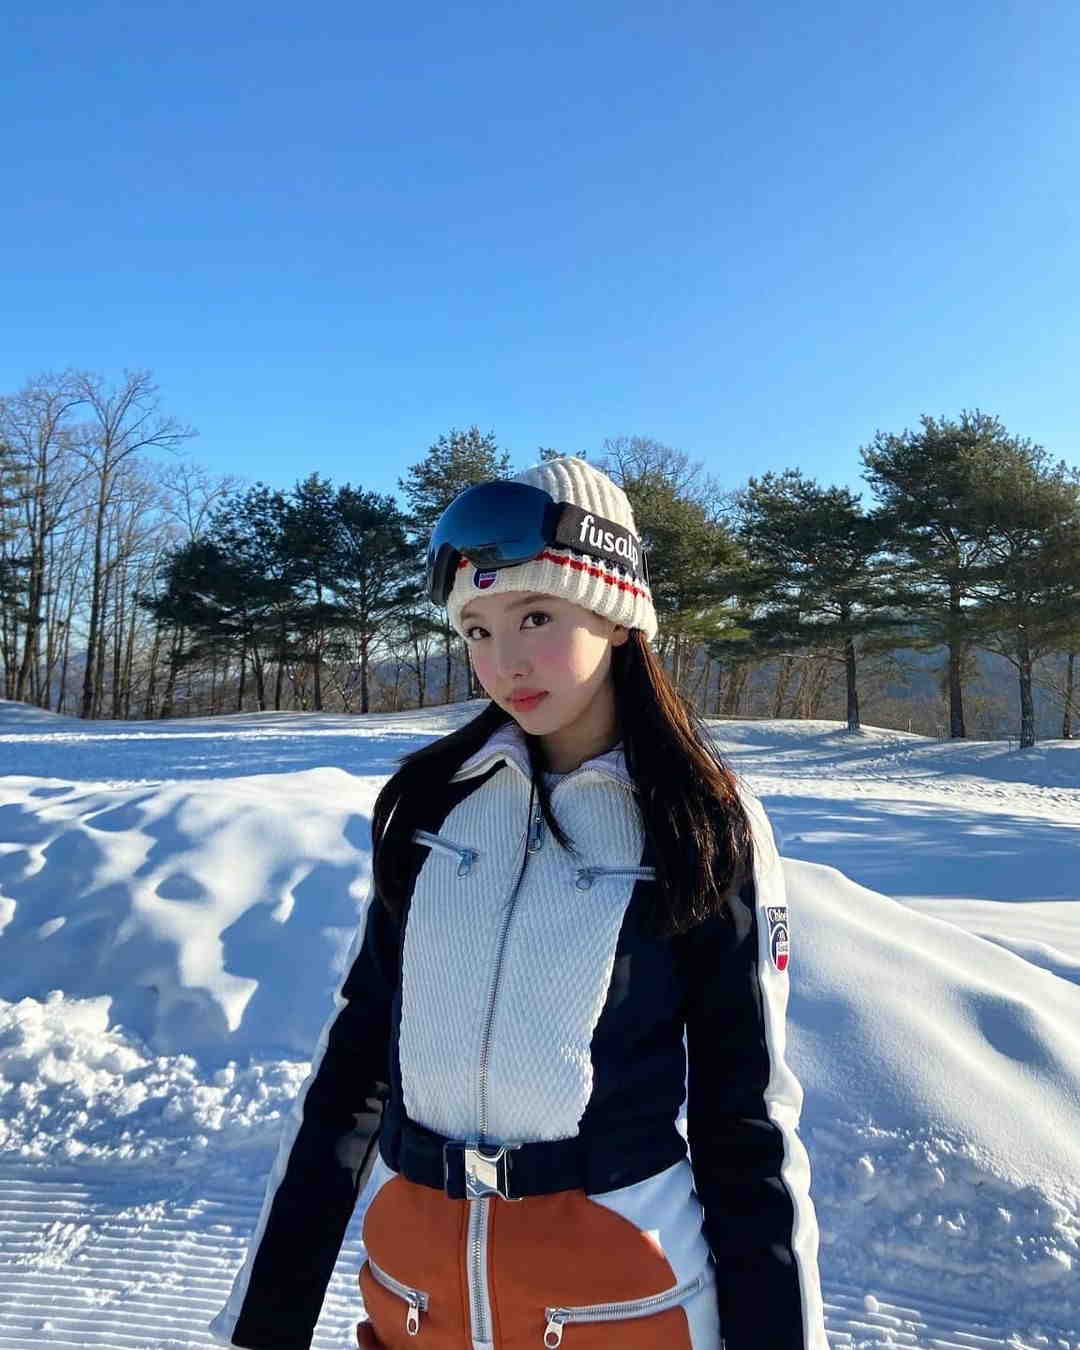 Nayeon TWICE - Biography, Profile, Facts, and Career